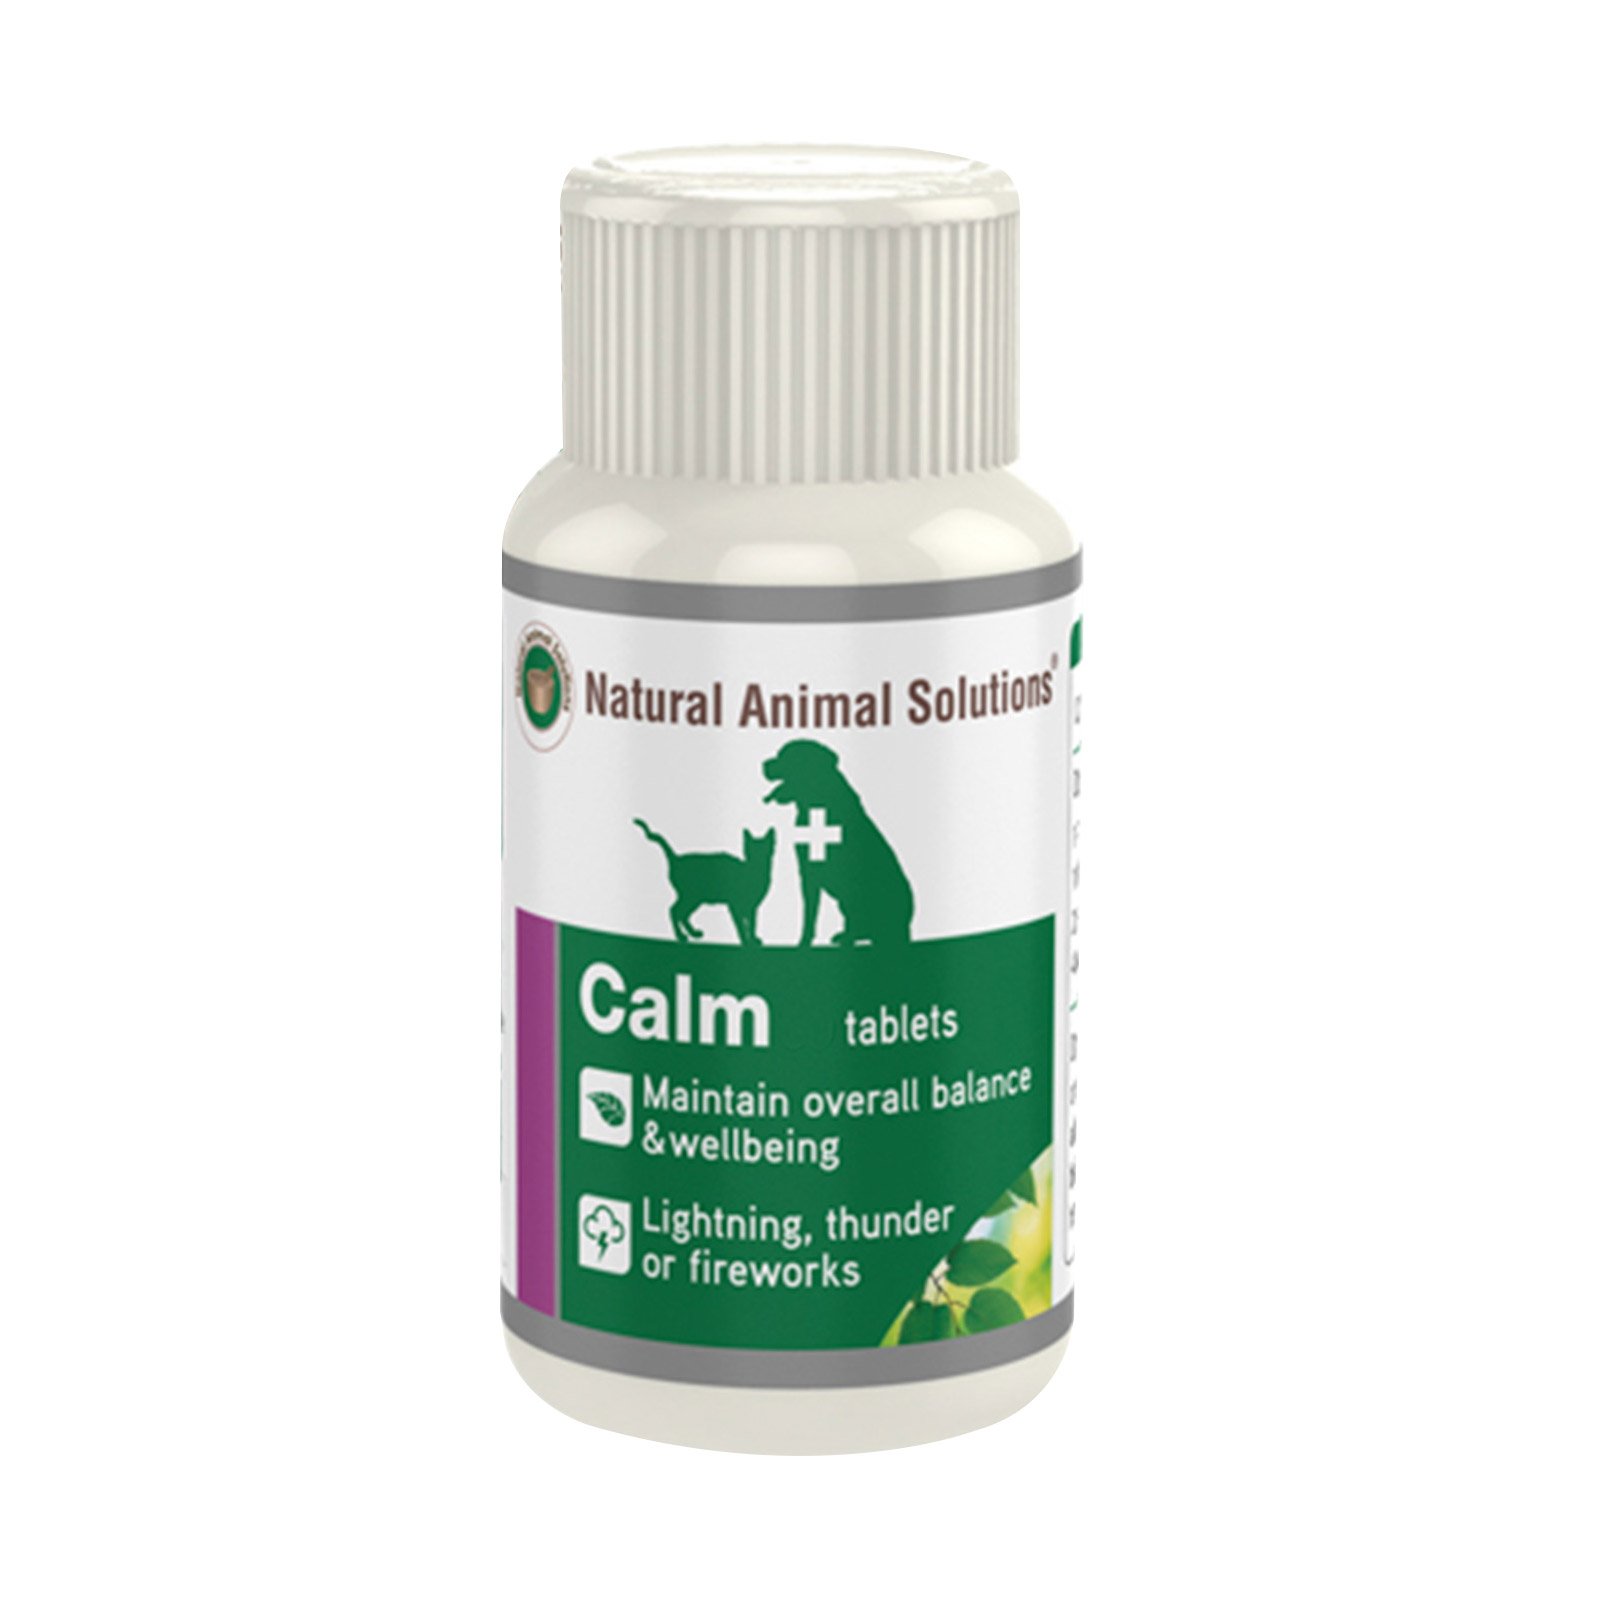 Natural Animal Solutions Calm Tablets for Dogs and Cats